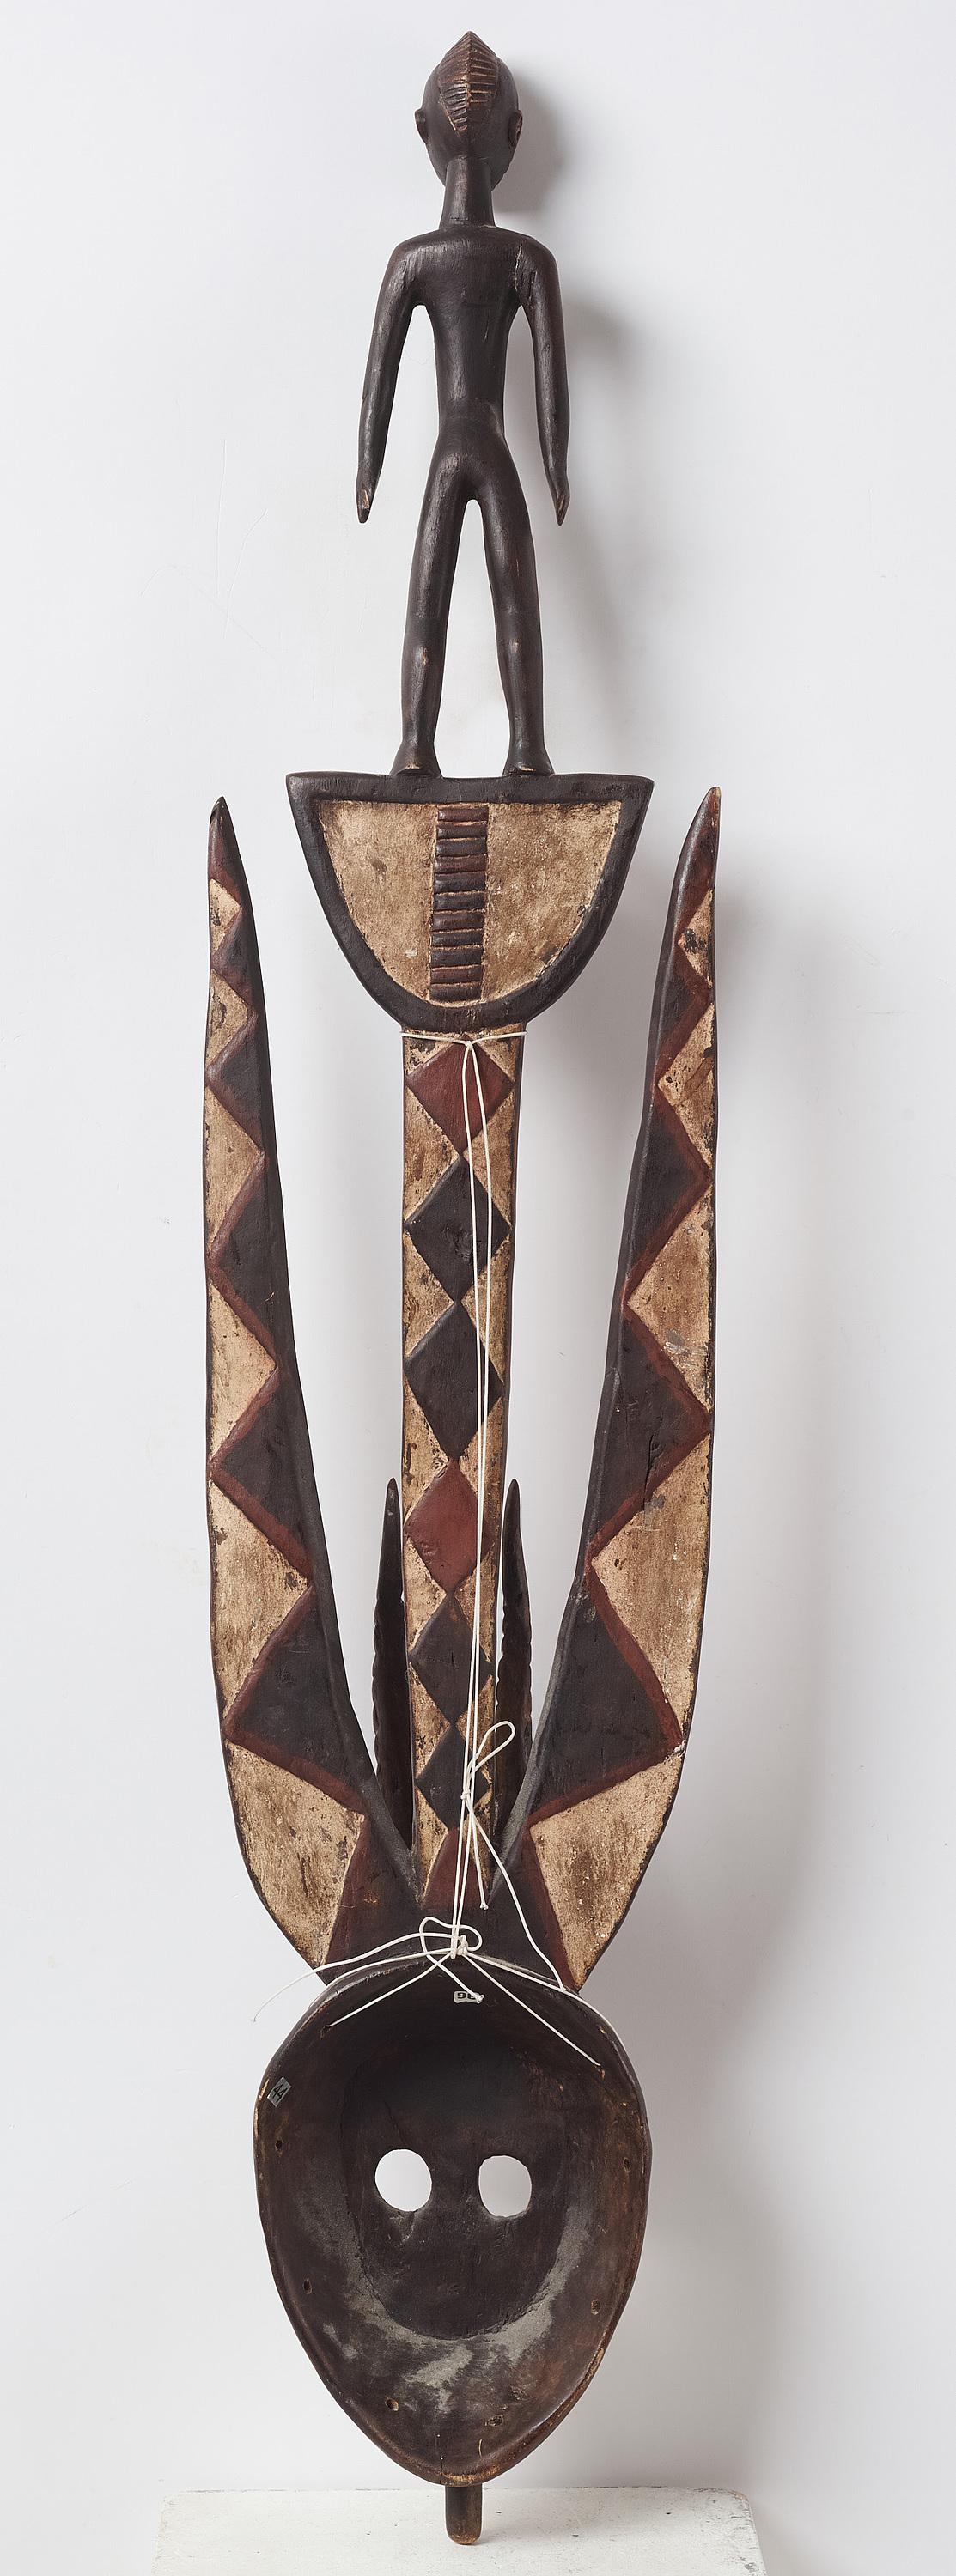 Bwa mask from Burkina Fasso 
Burkina Faso, Black Volta River region
Culture: Bwa peoples
Provenance: Private Swedish  collection 
Bwa plank masks are conceived to embody supernatural forces that act on behalf of the families that commission and use